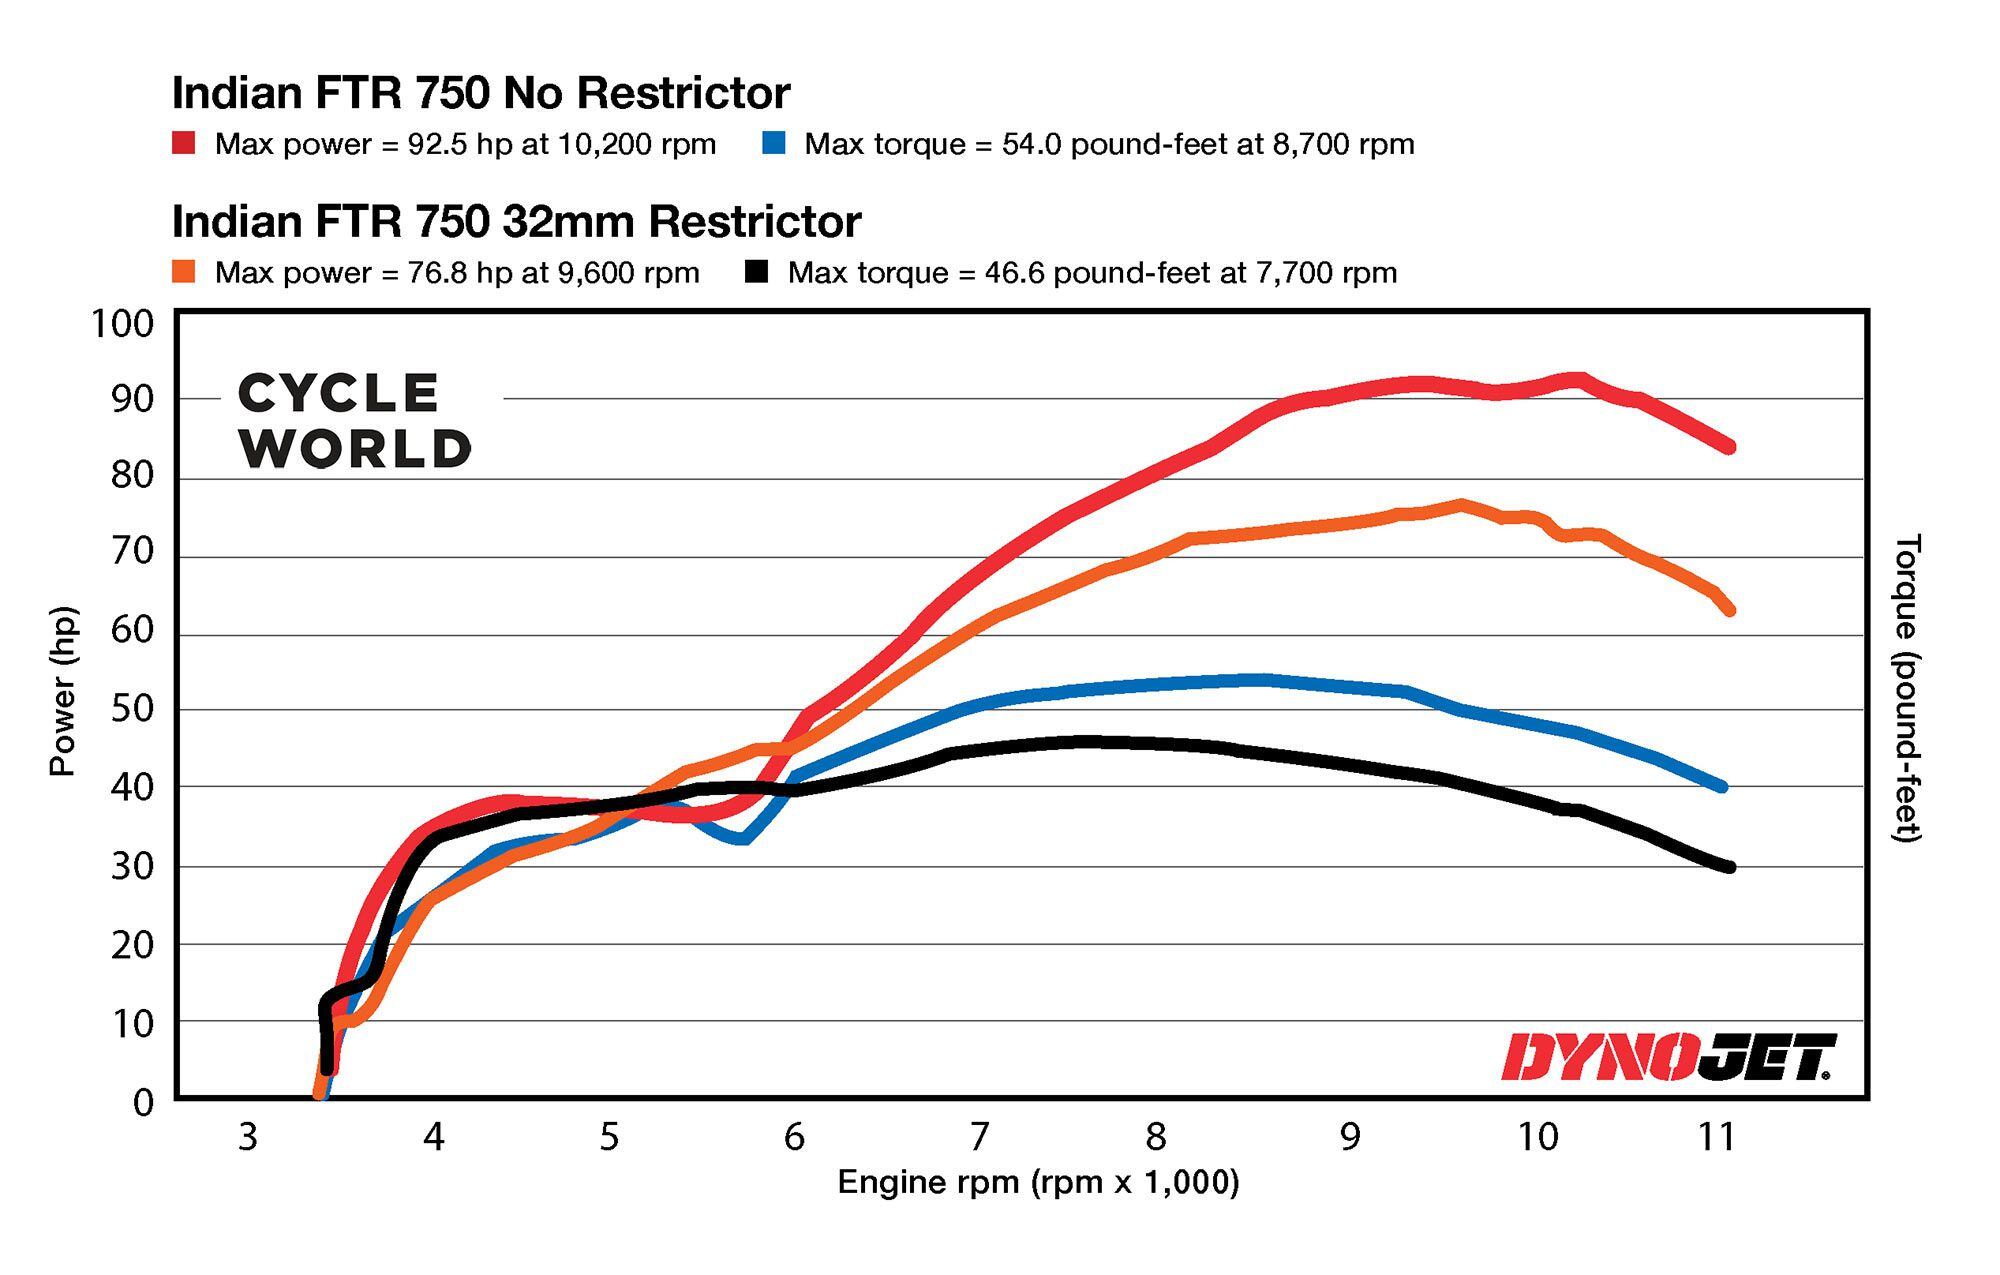 Unrestricted and 32mm restrictor-equipped Indian FTR750 dyno runs.